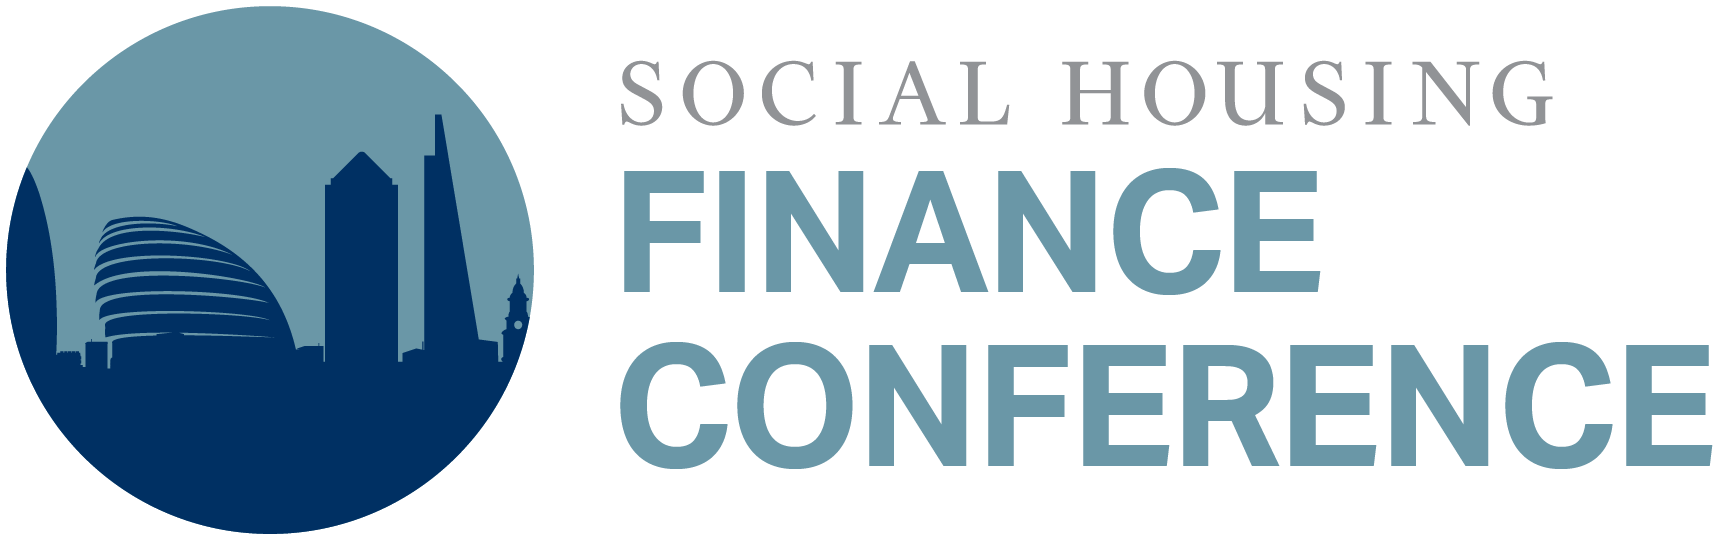 Social Housing Finance Conference